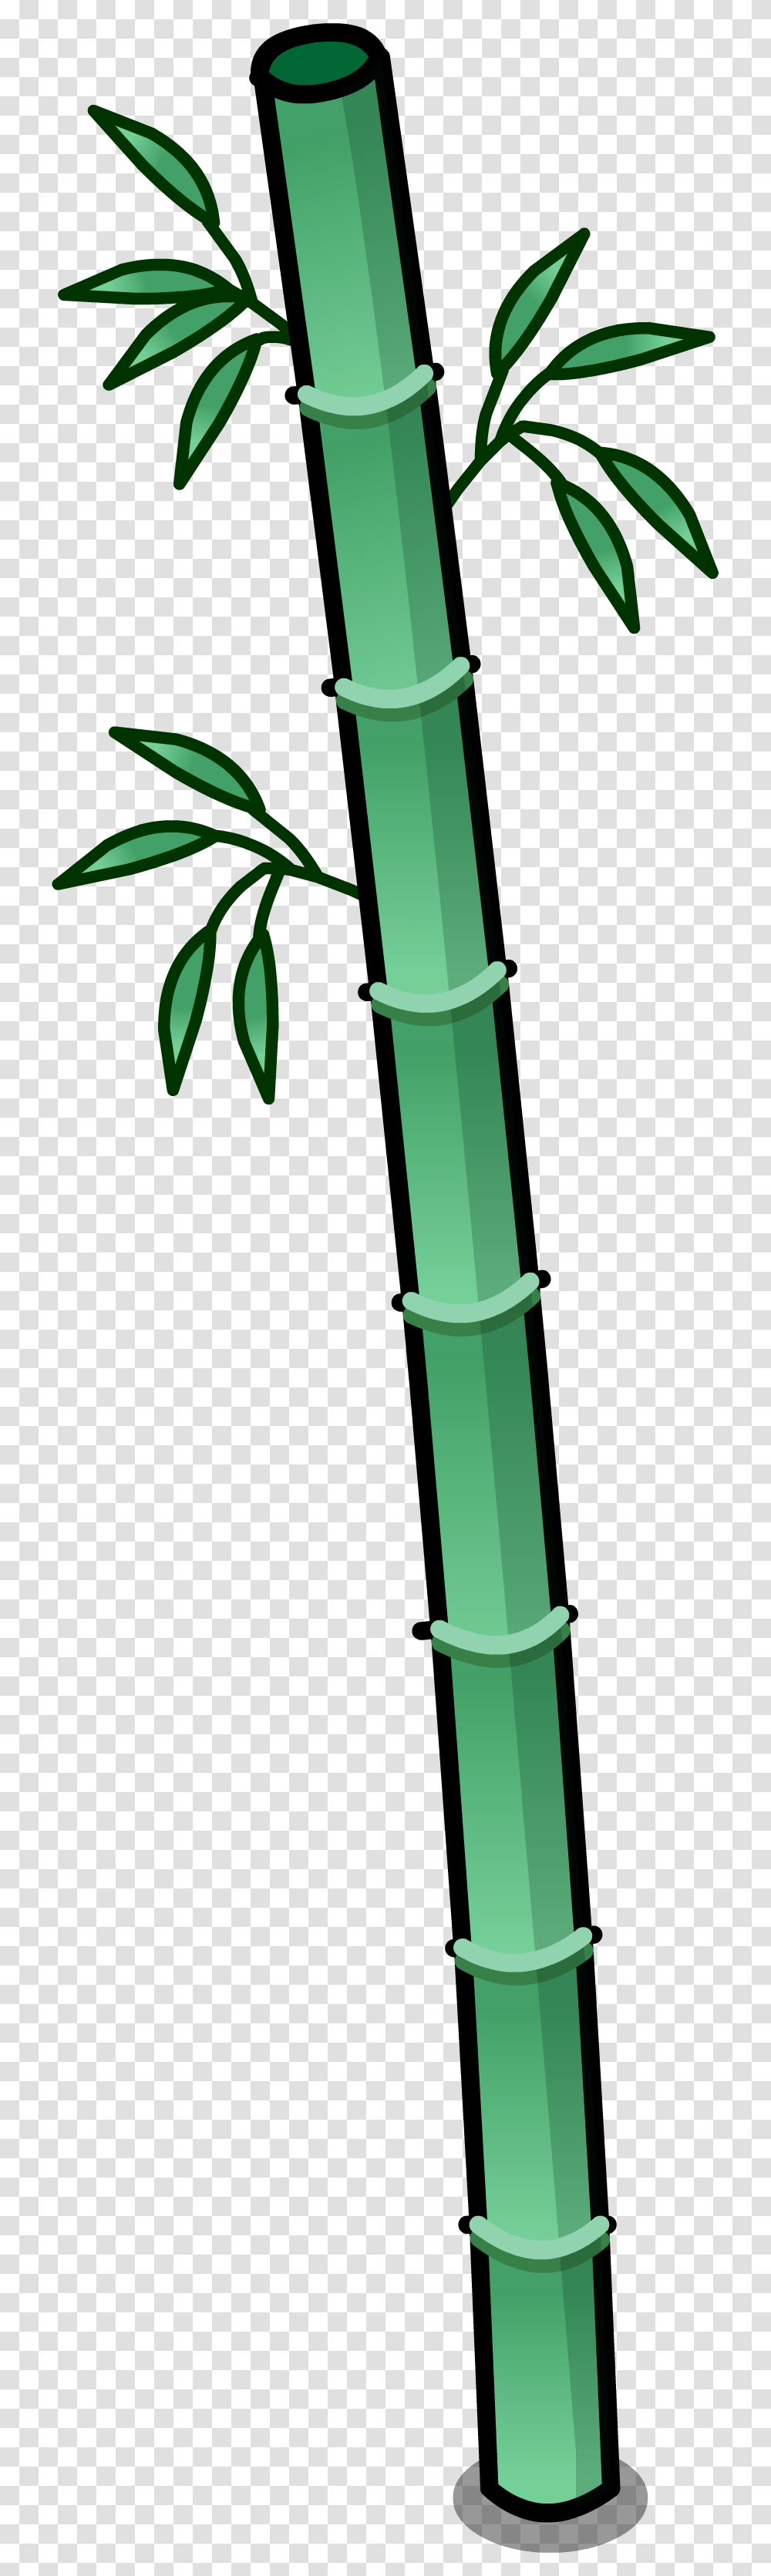 Club Penguin Wiki Tree, Plant, Bamboo, Sword, Blade Transparent Png